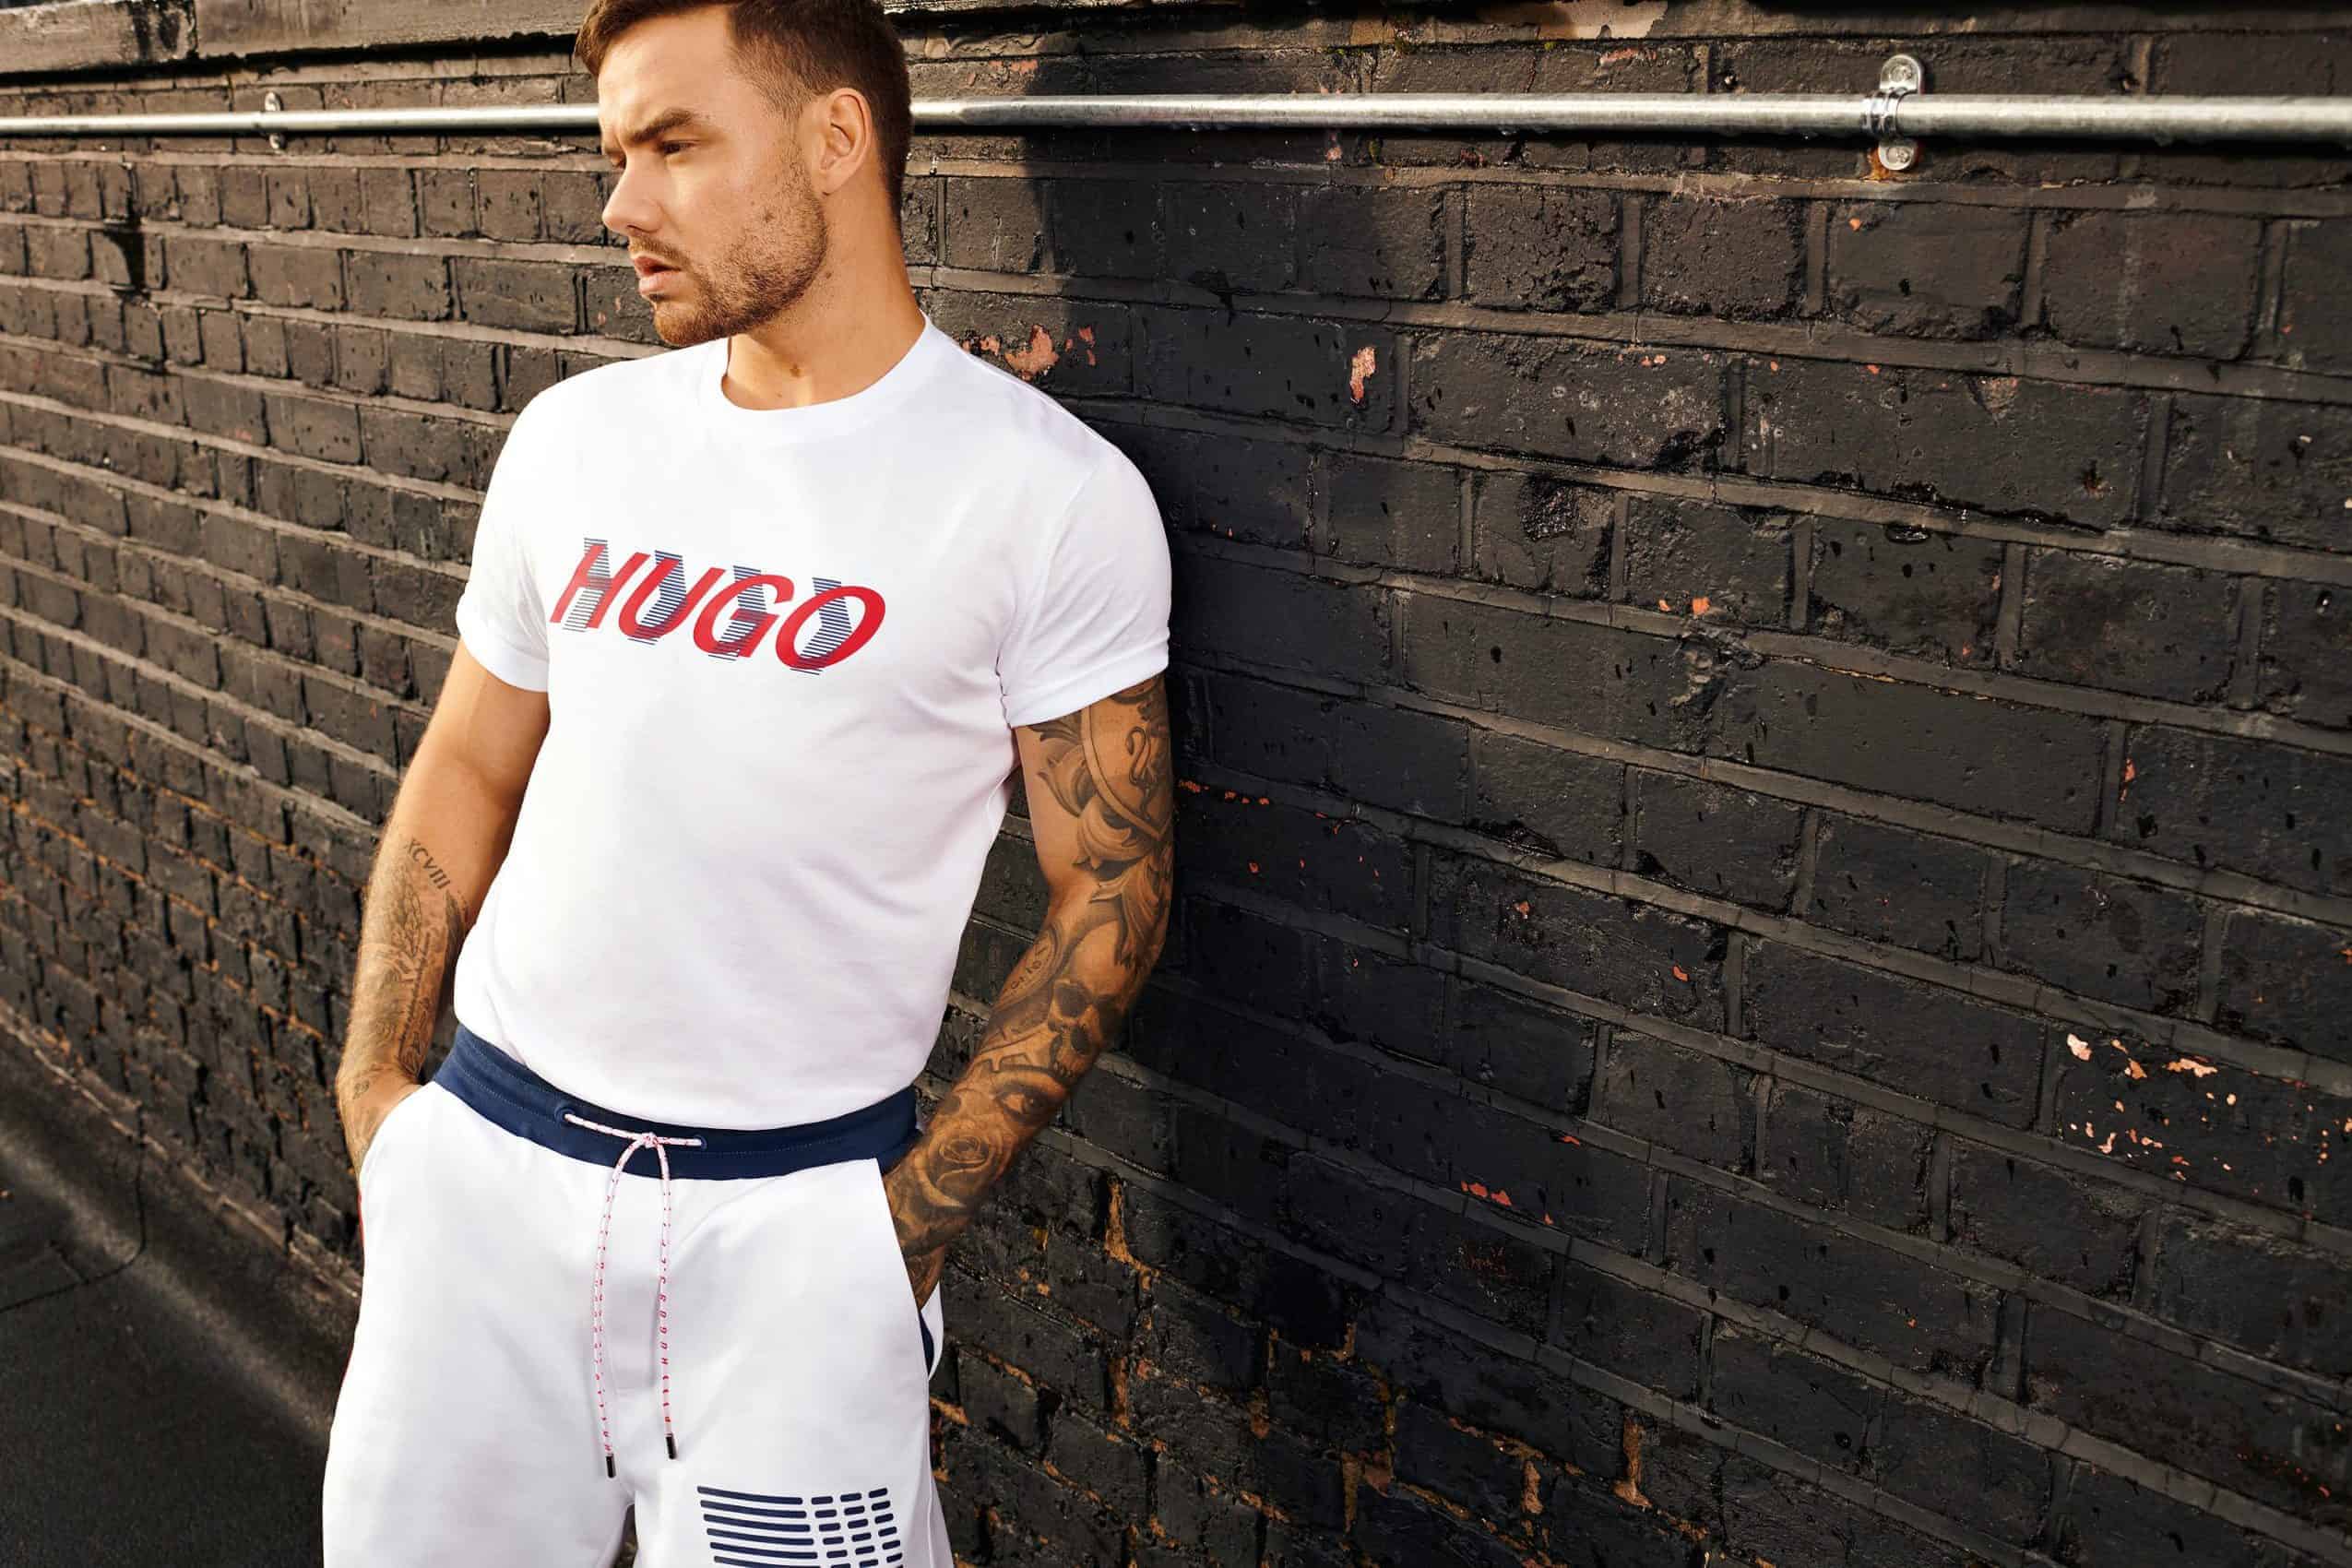 Hugo X Liam Payne Launch Second Collection Today - Daily Front Row